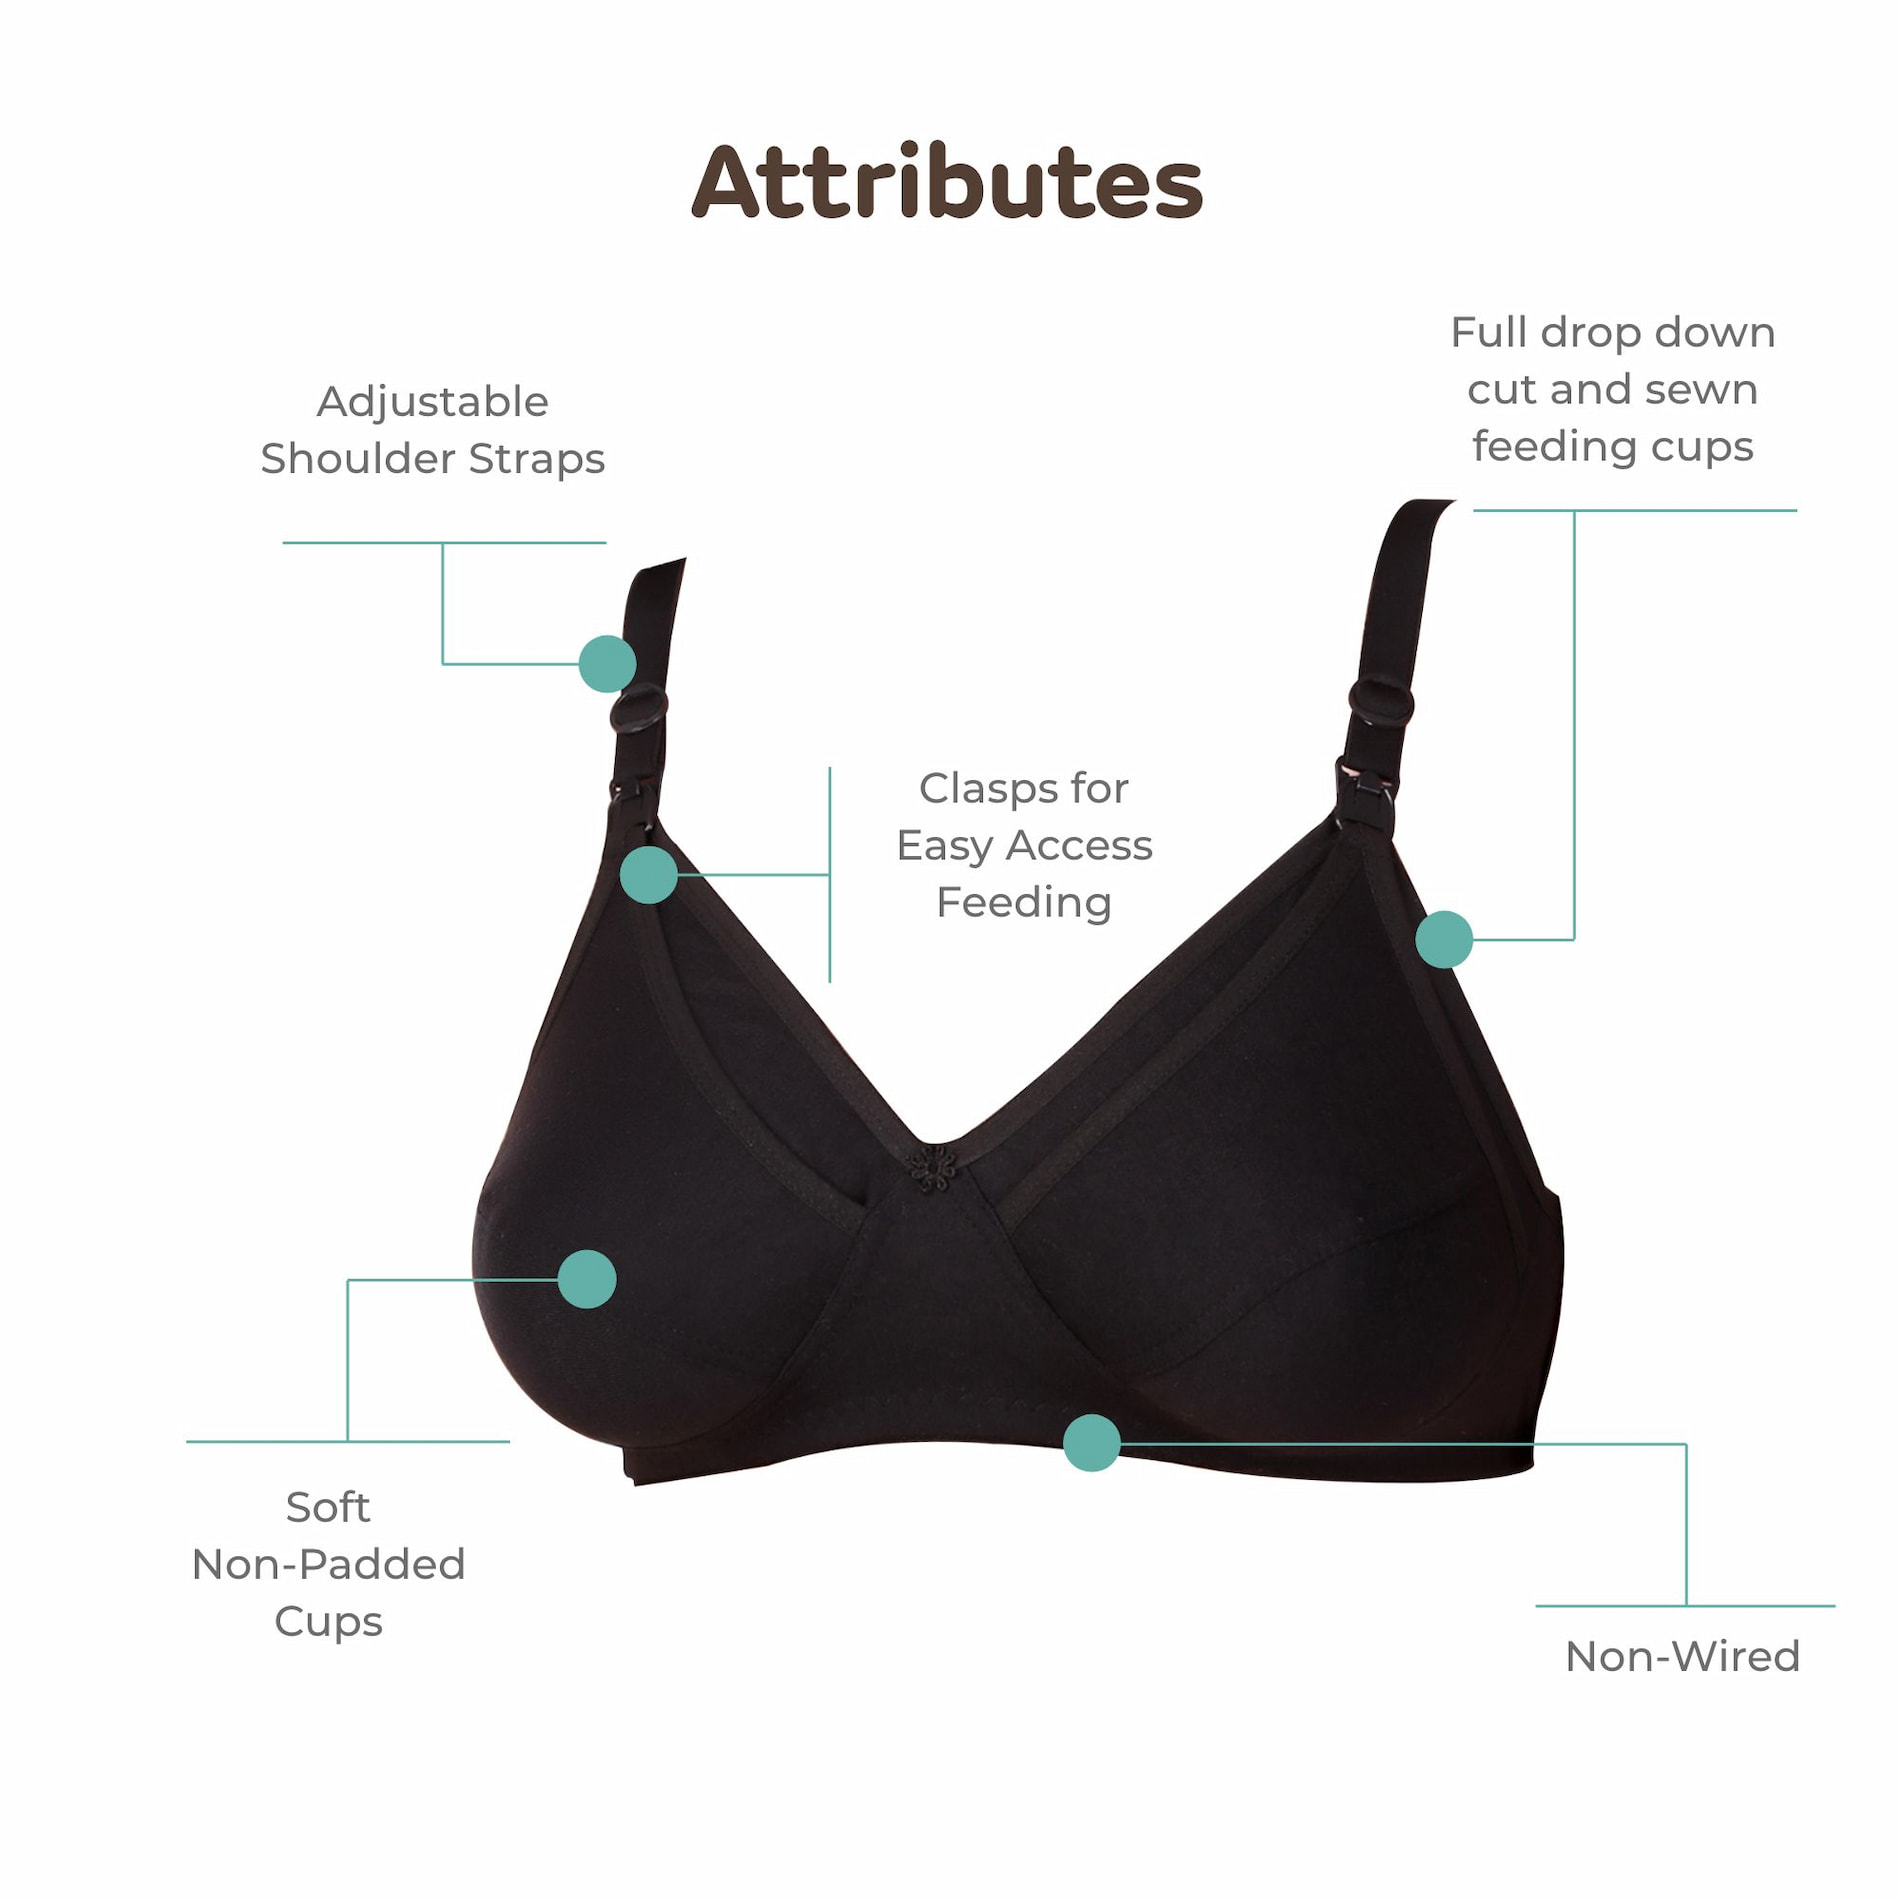 Maternity/Nursing Bras Non-Wired, Non-Padded with free Bra Extender - Classic Black 36 B 